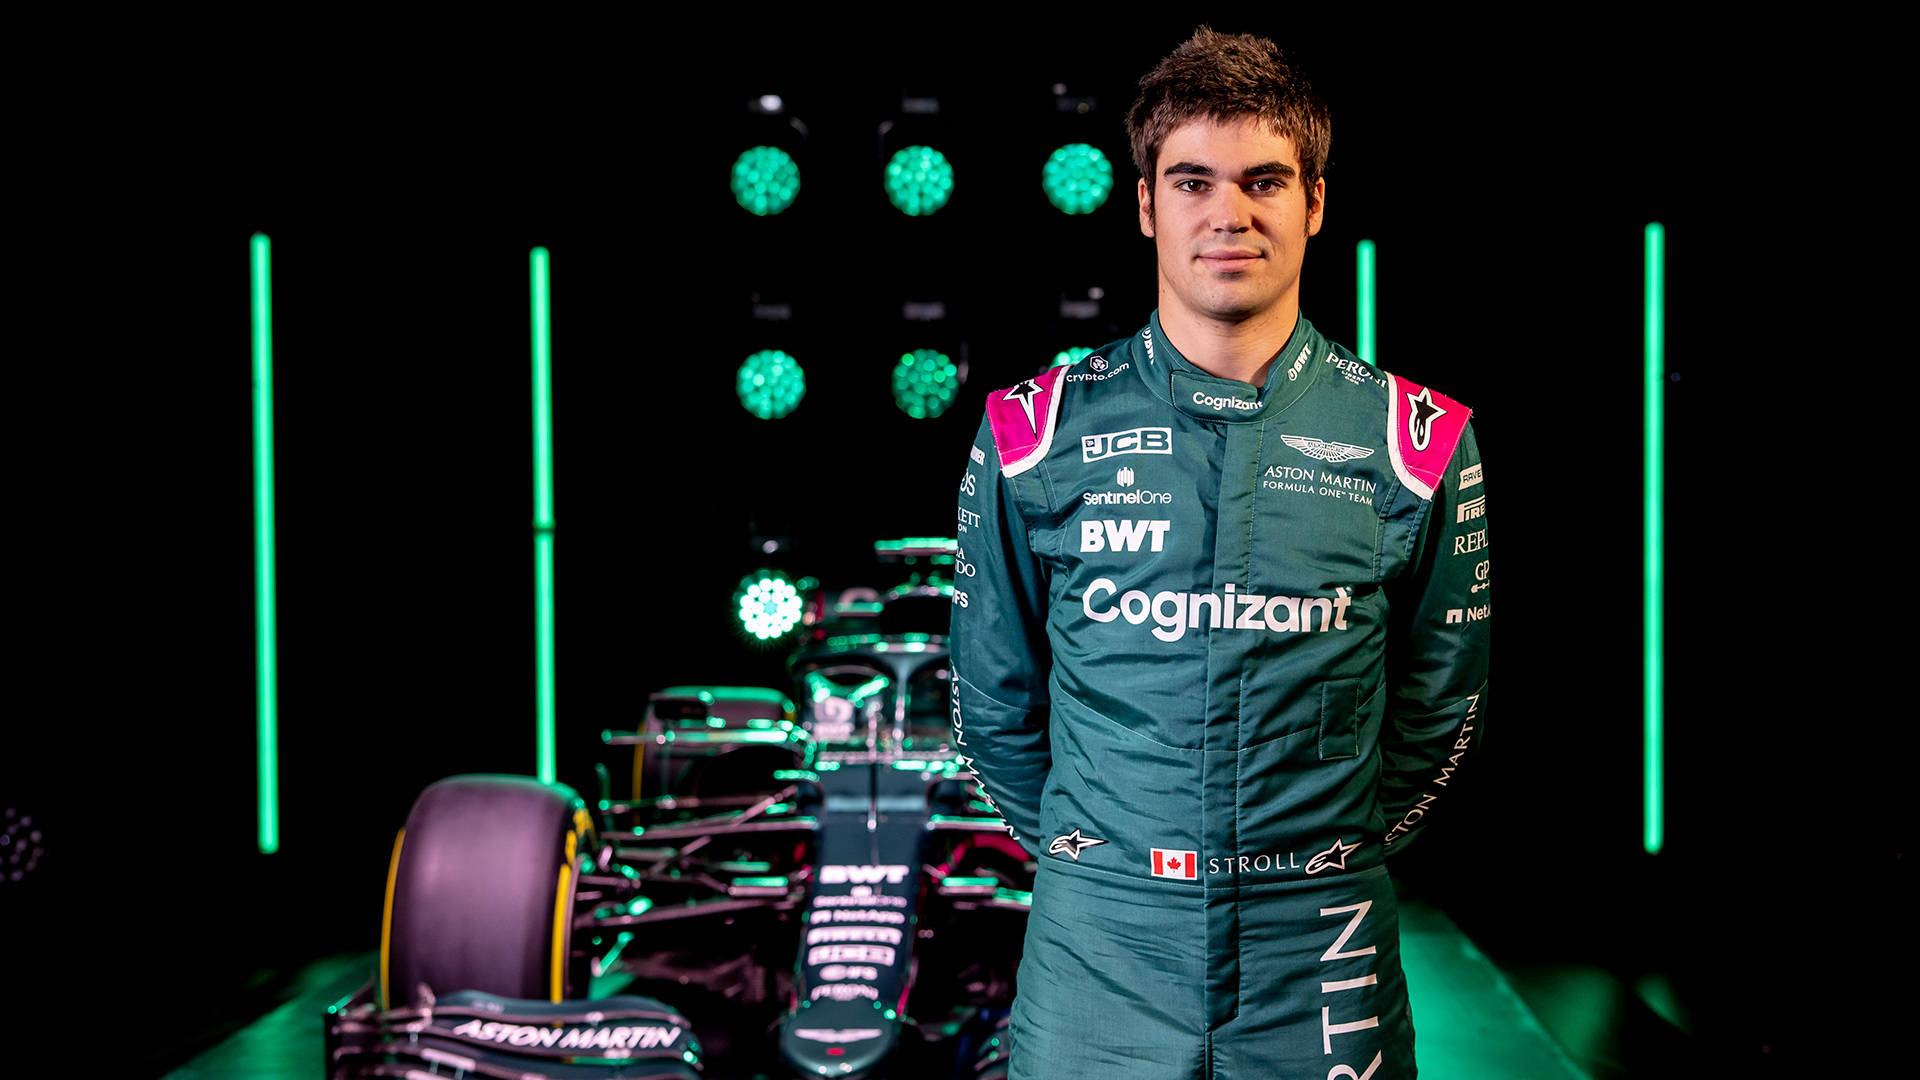 F1 Star Lance Stroll Posing with His Racing Car Wallpaper